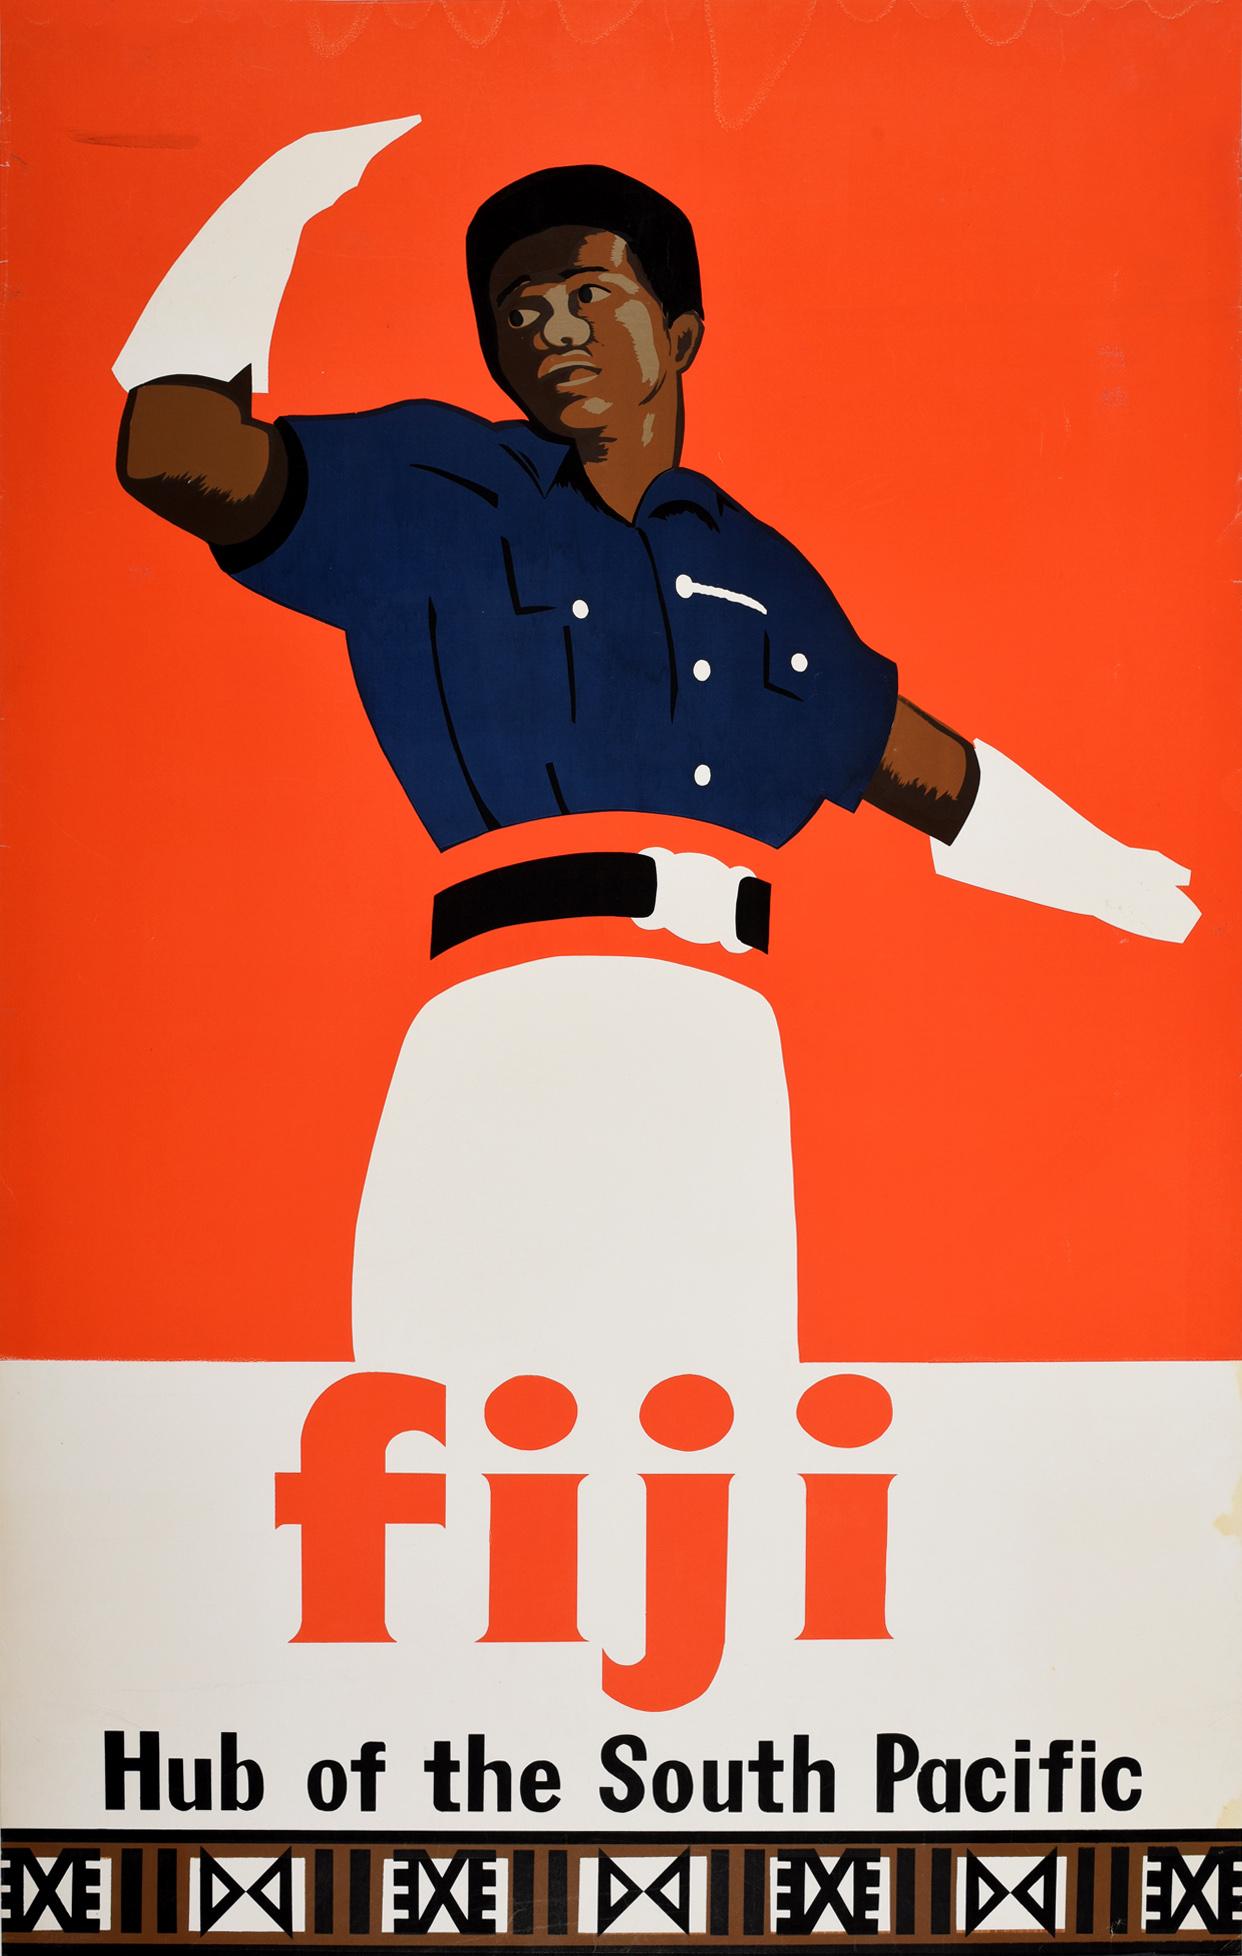 Unknown Print - Original Vintage Travel Poster For Fiji Hub Of The South Pacific Ocean Islands